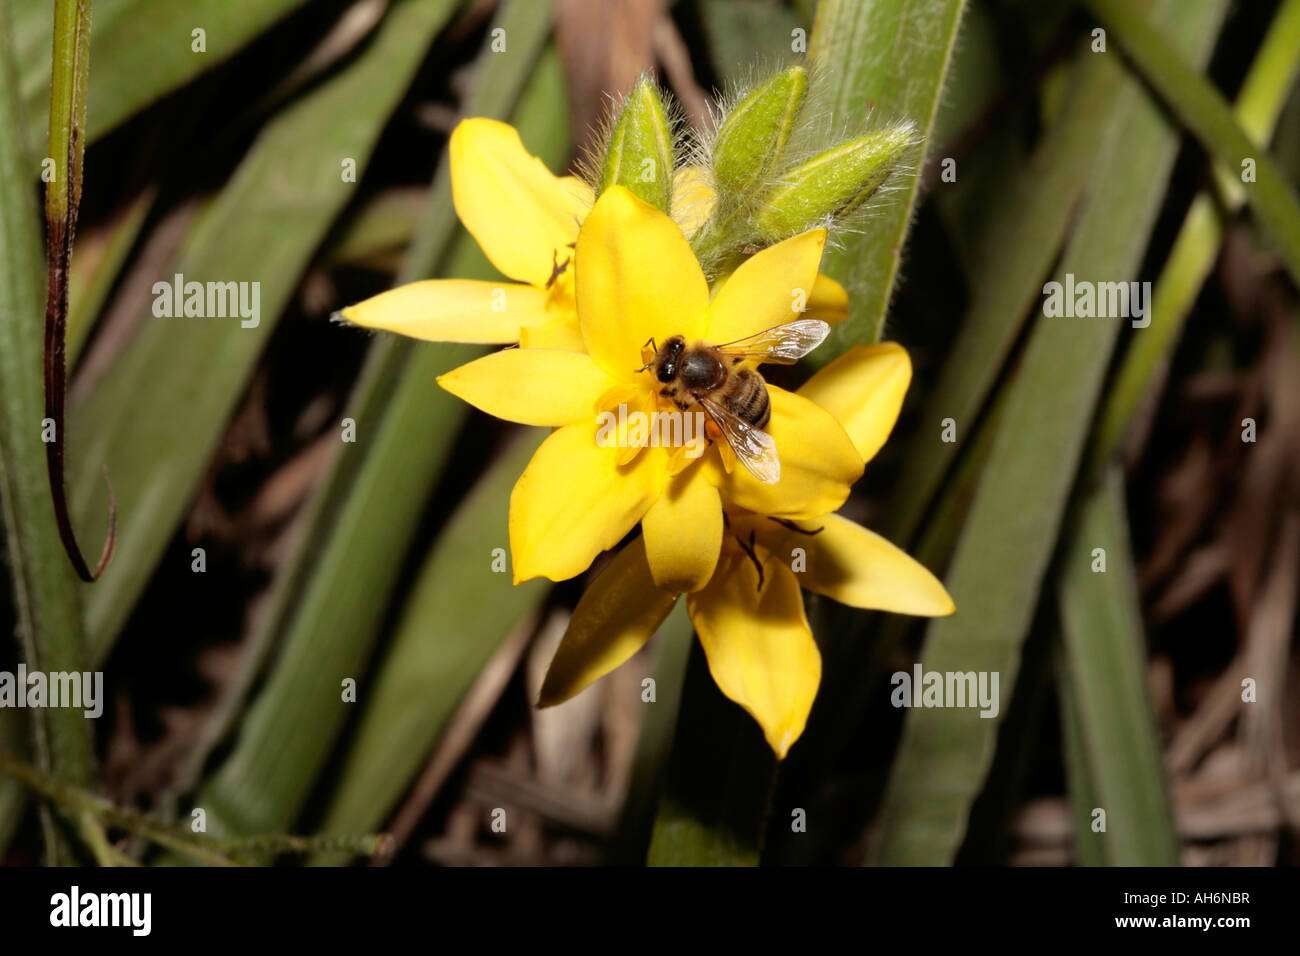 Honey Bee collecting pollen from Star Grass flower- Apis mellifera on Hypoxis longifolia Stock Photo